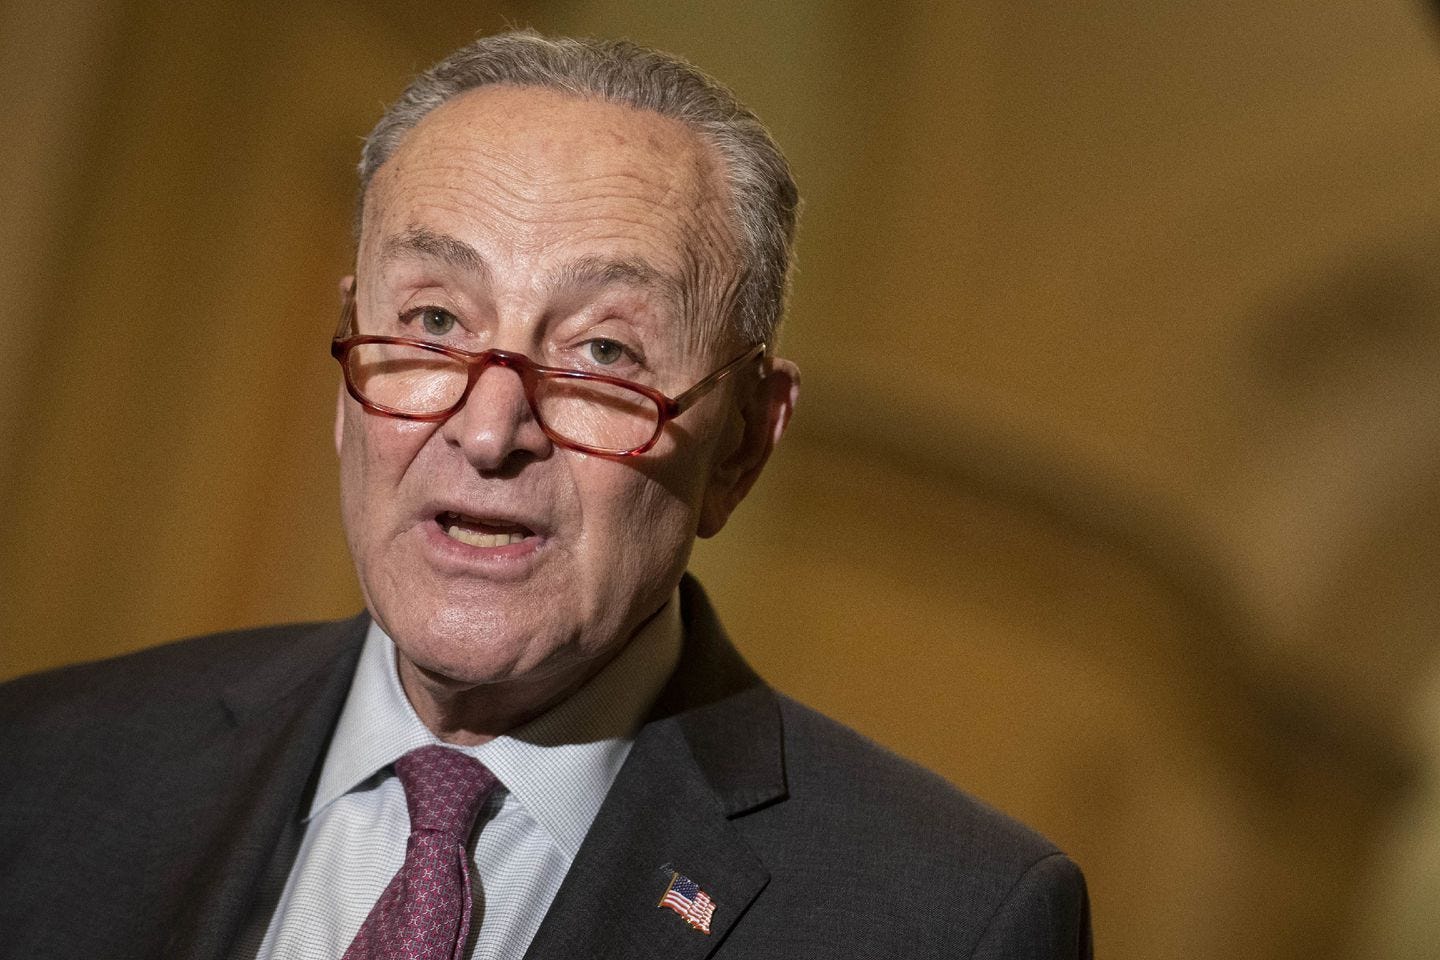 Senate majority leader Chuck Schumer spoke during news conference at the Capitol in Washington on Dec. 14.